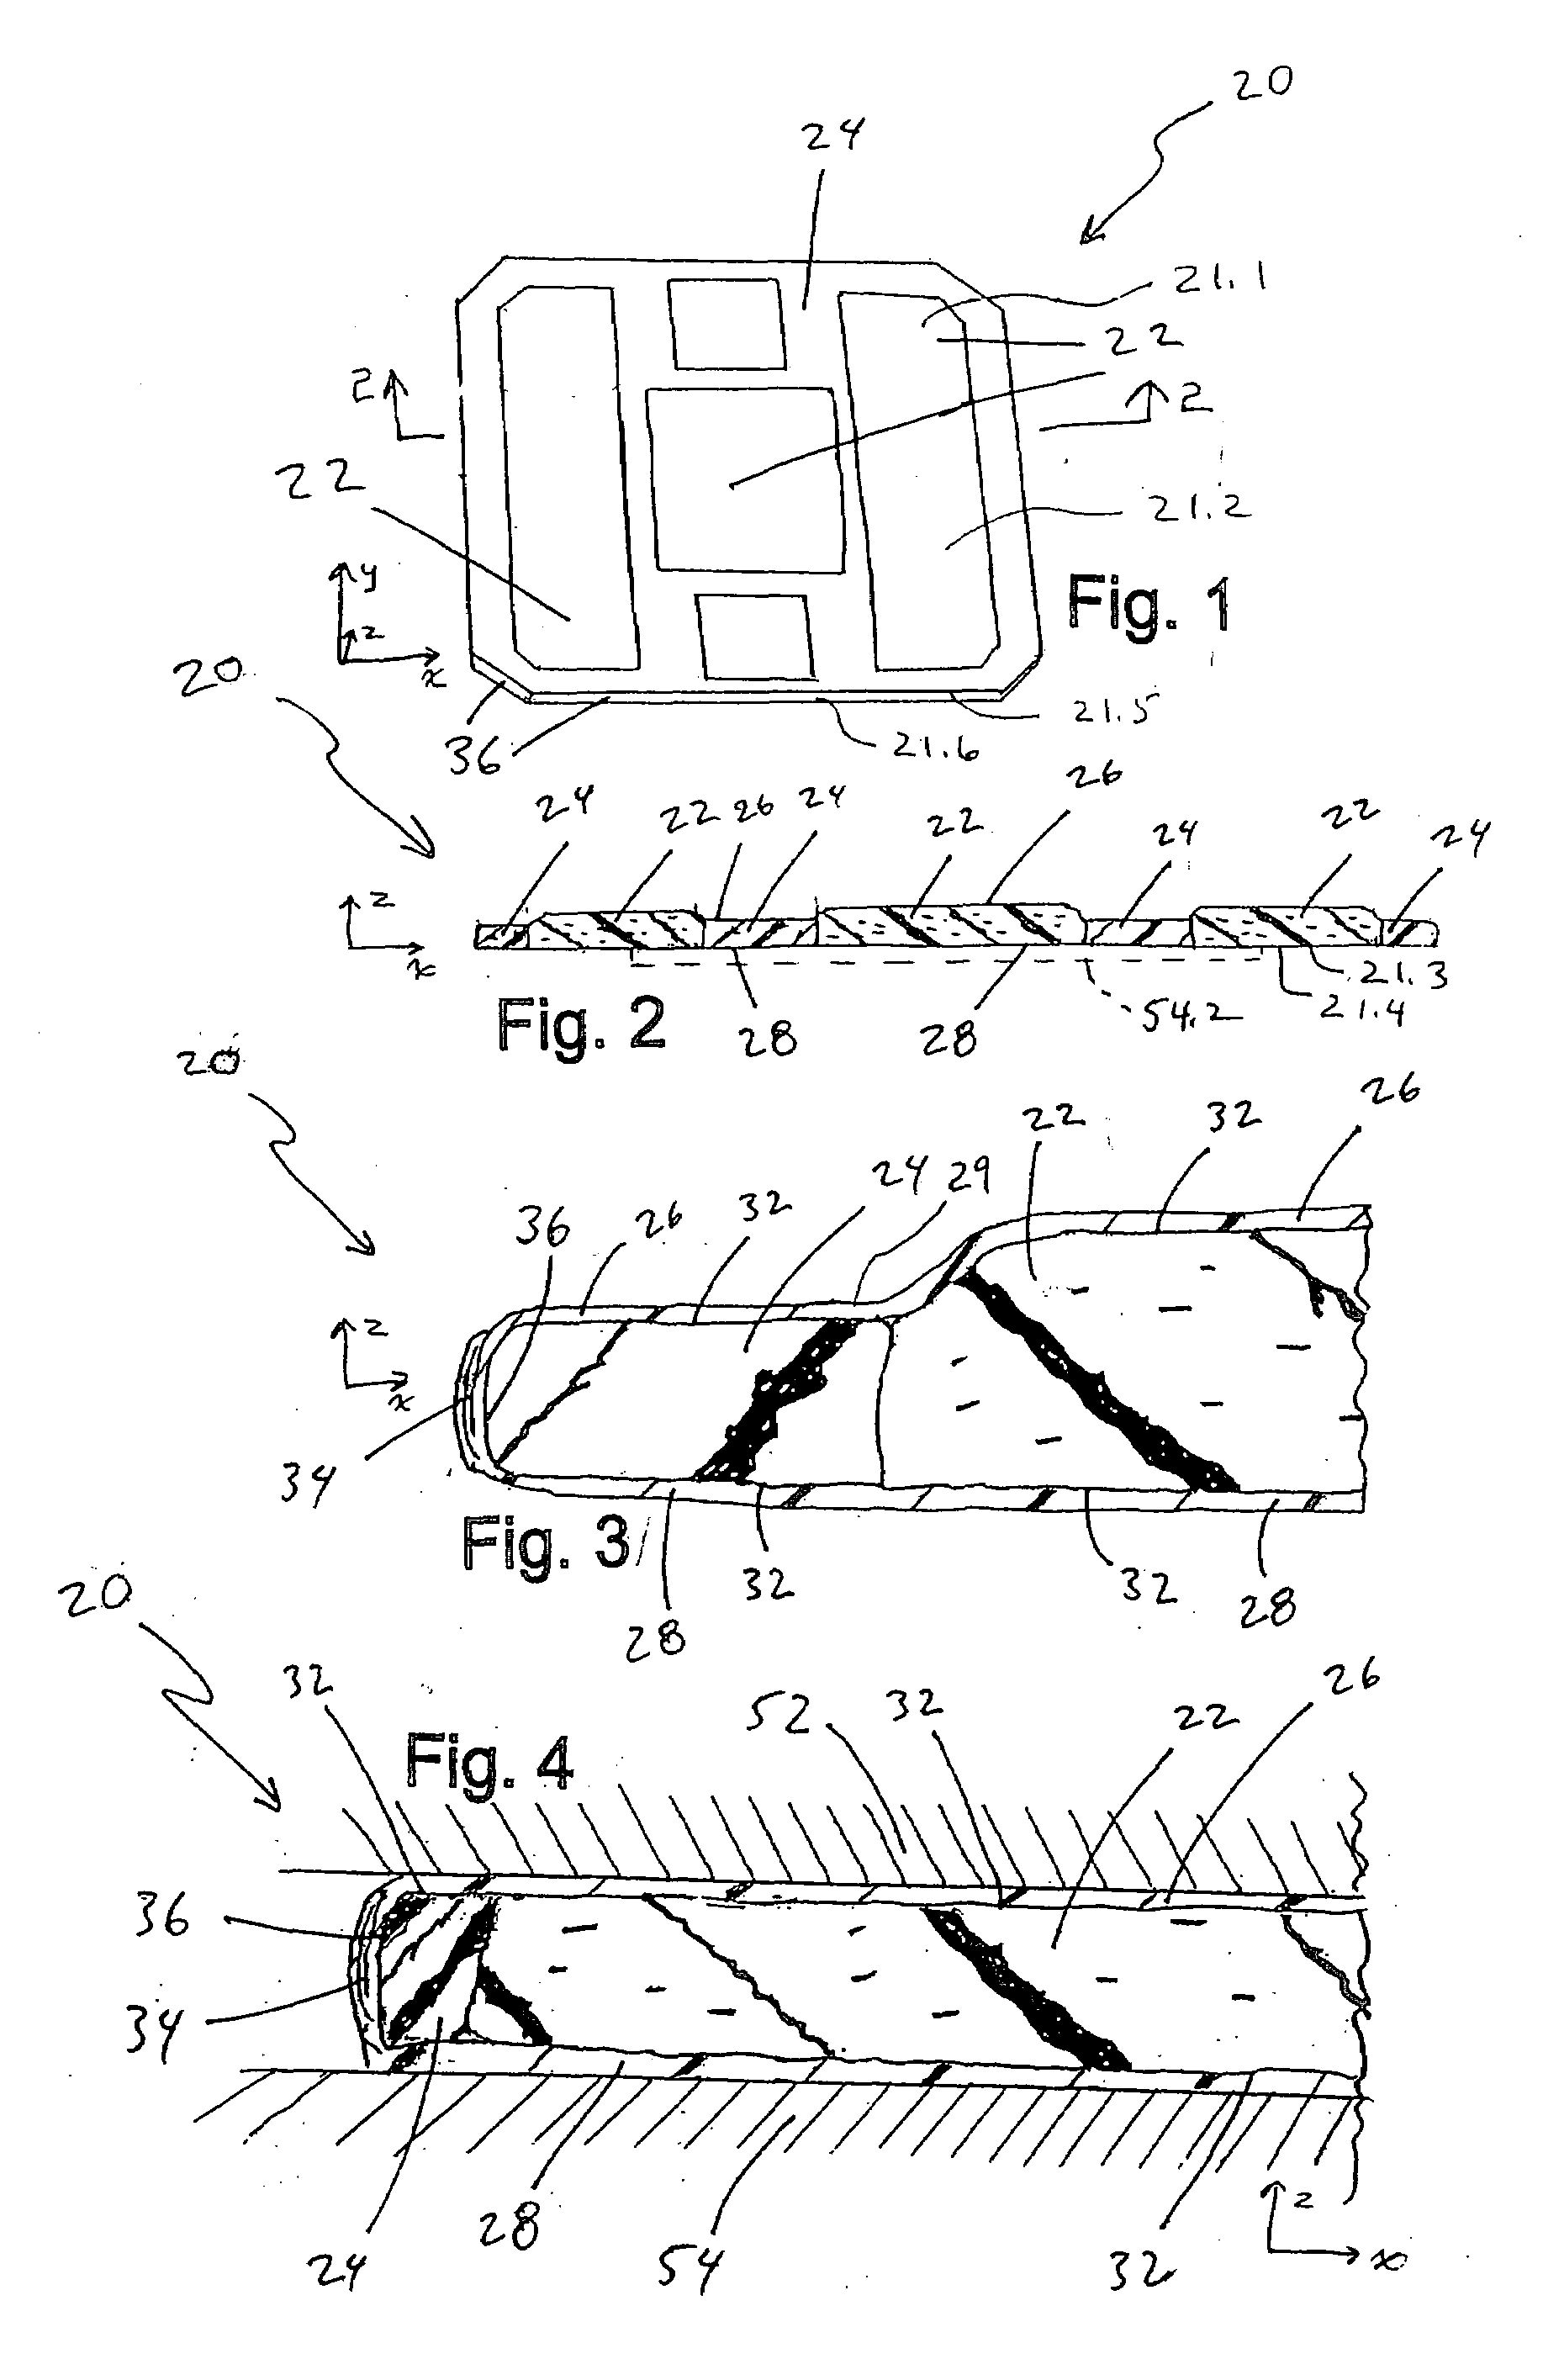 Sealed thermal interface component